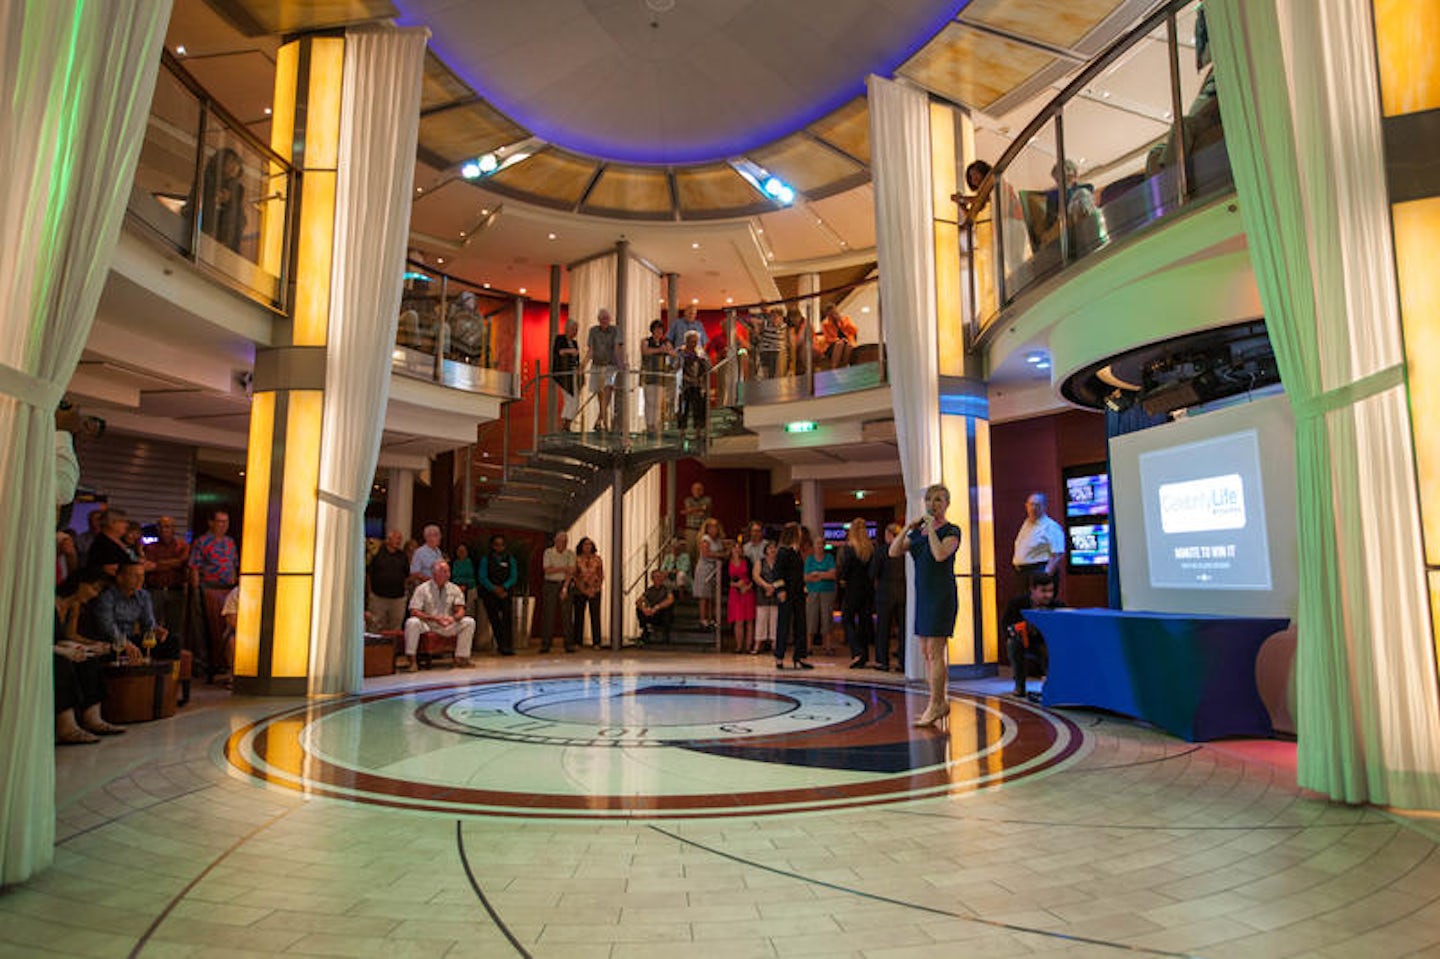 The Entertainment Court on Celebrity Equinox